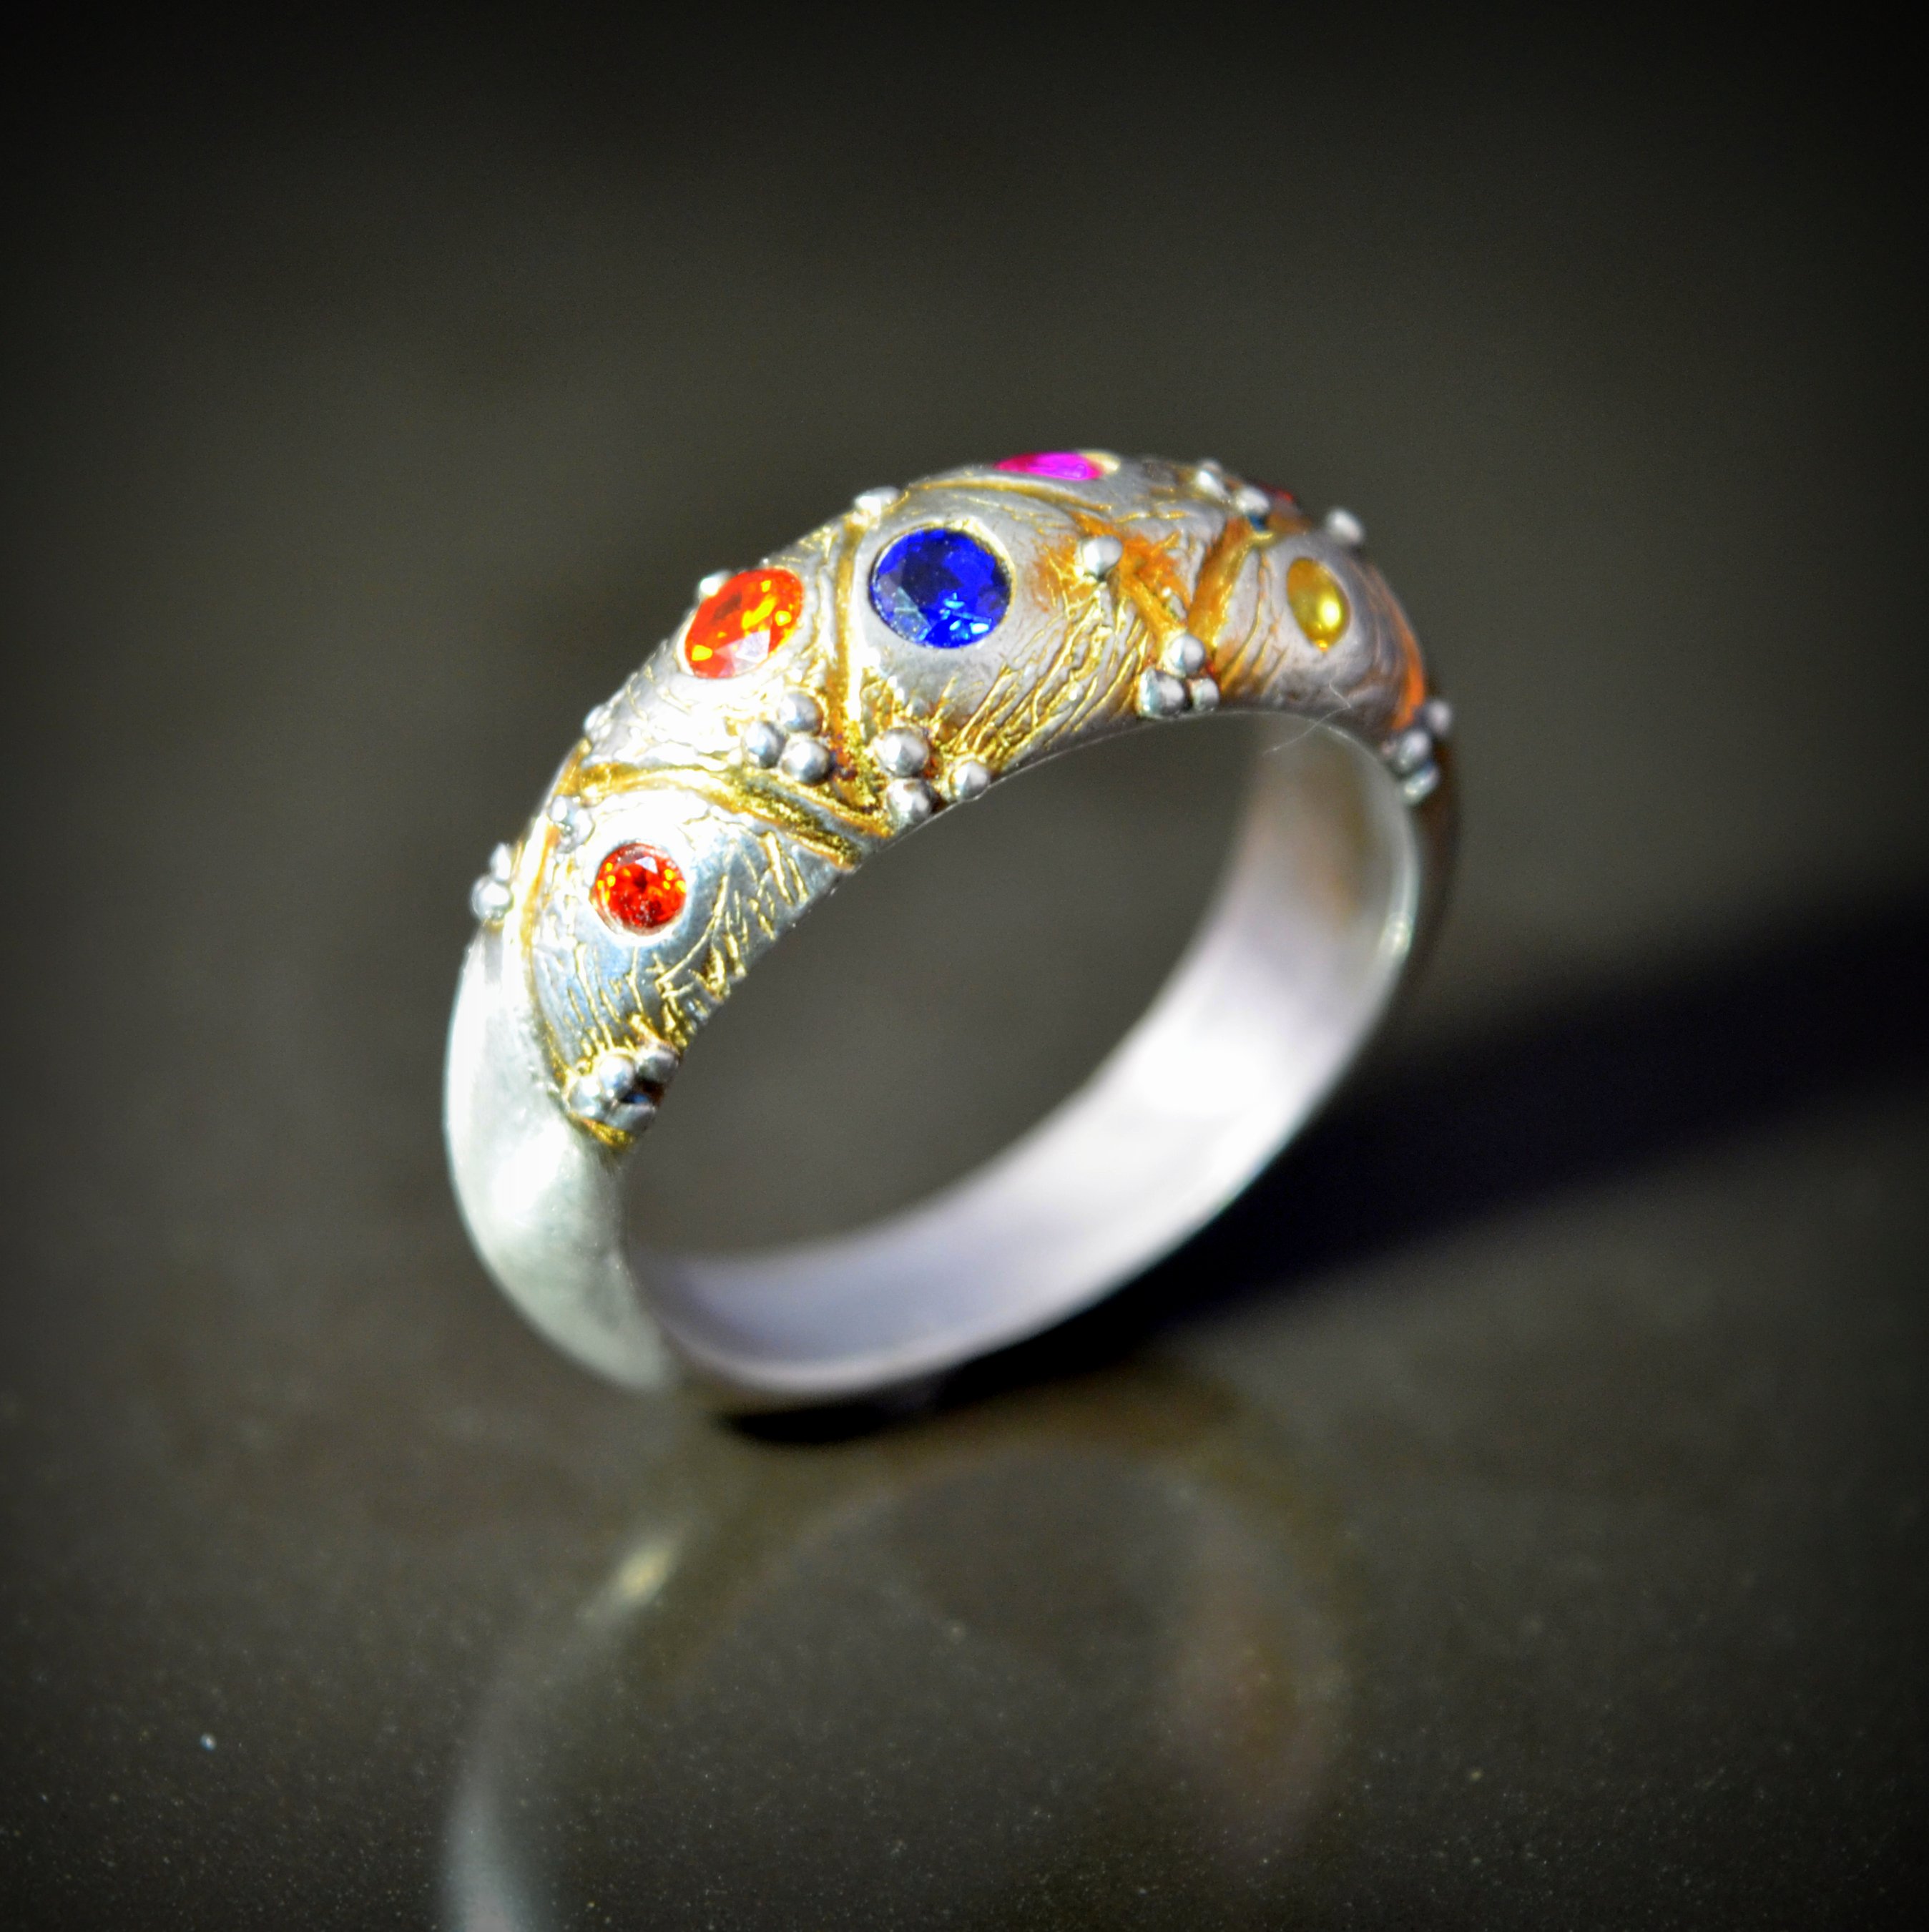 Harlequin Ring by Tracey Spurgin of Craftworx Jewellery Workshops